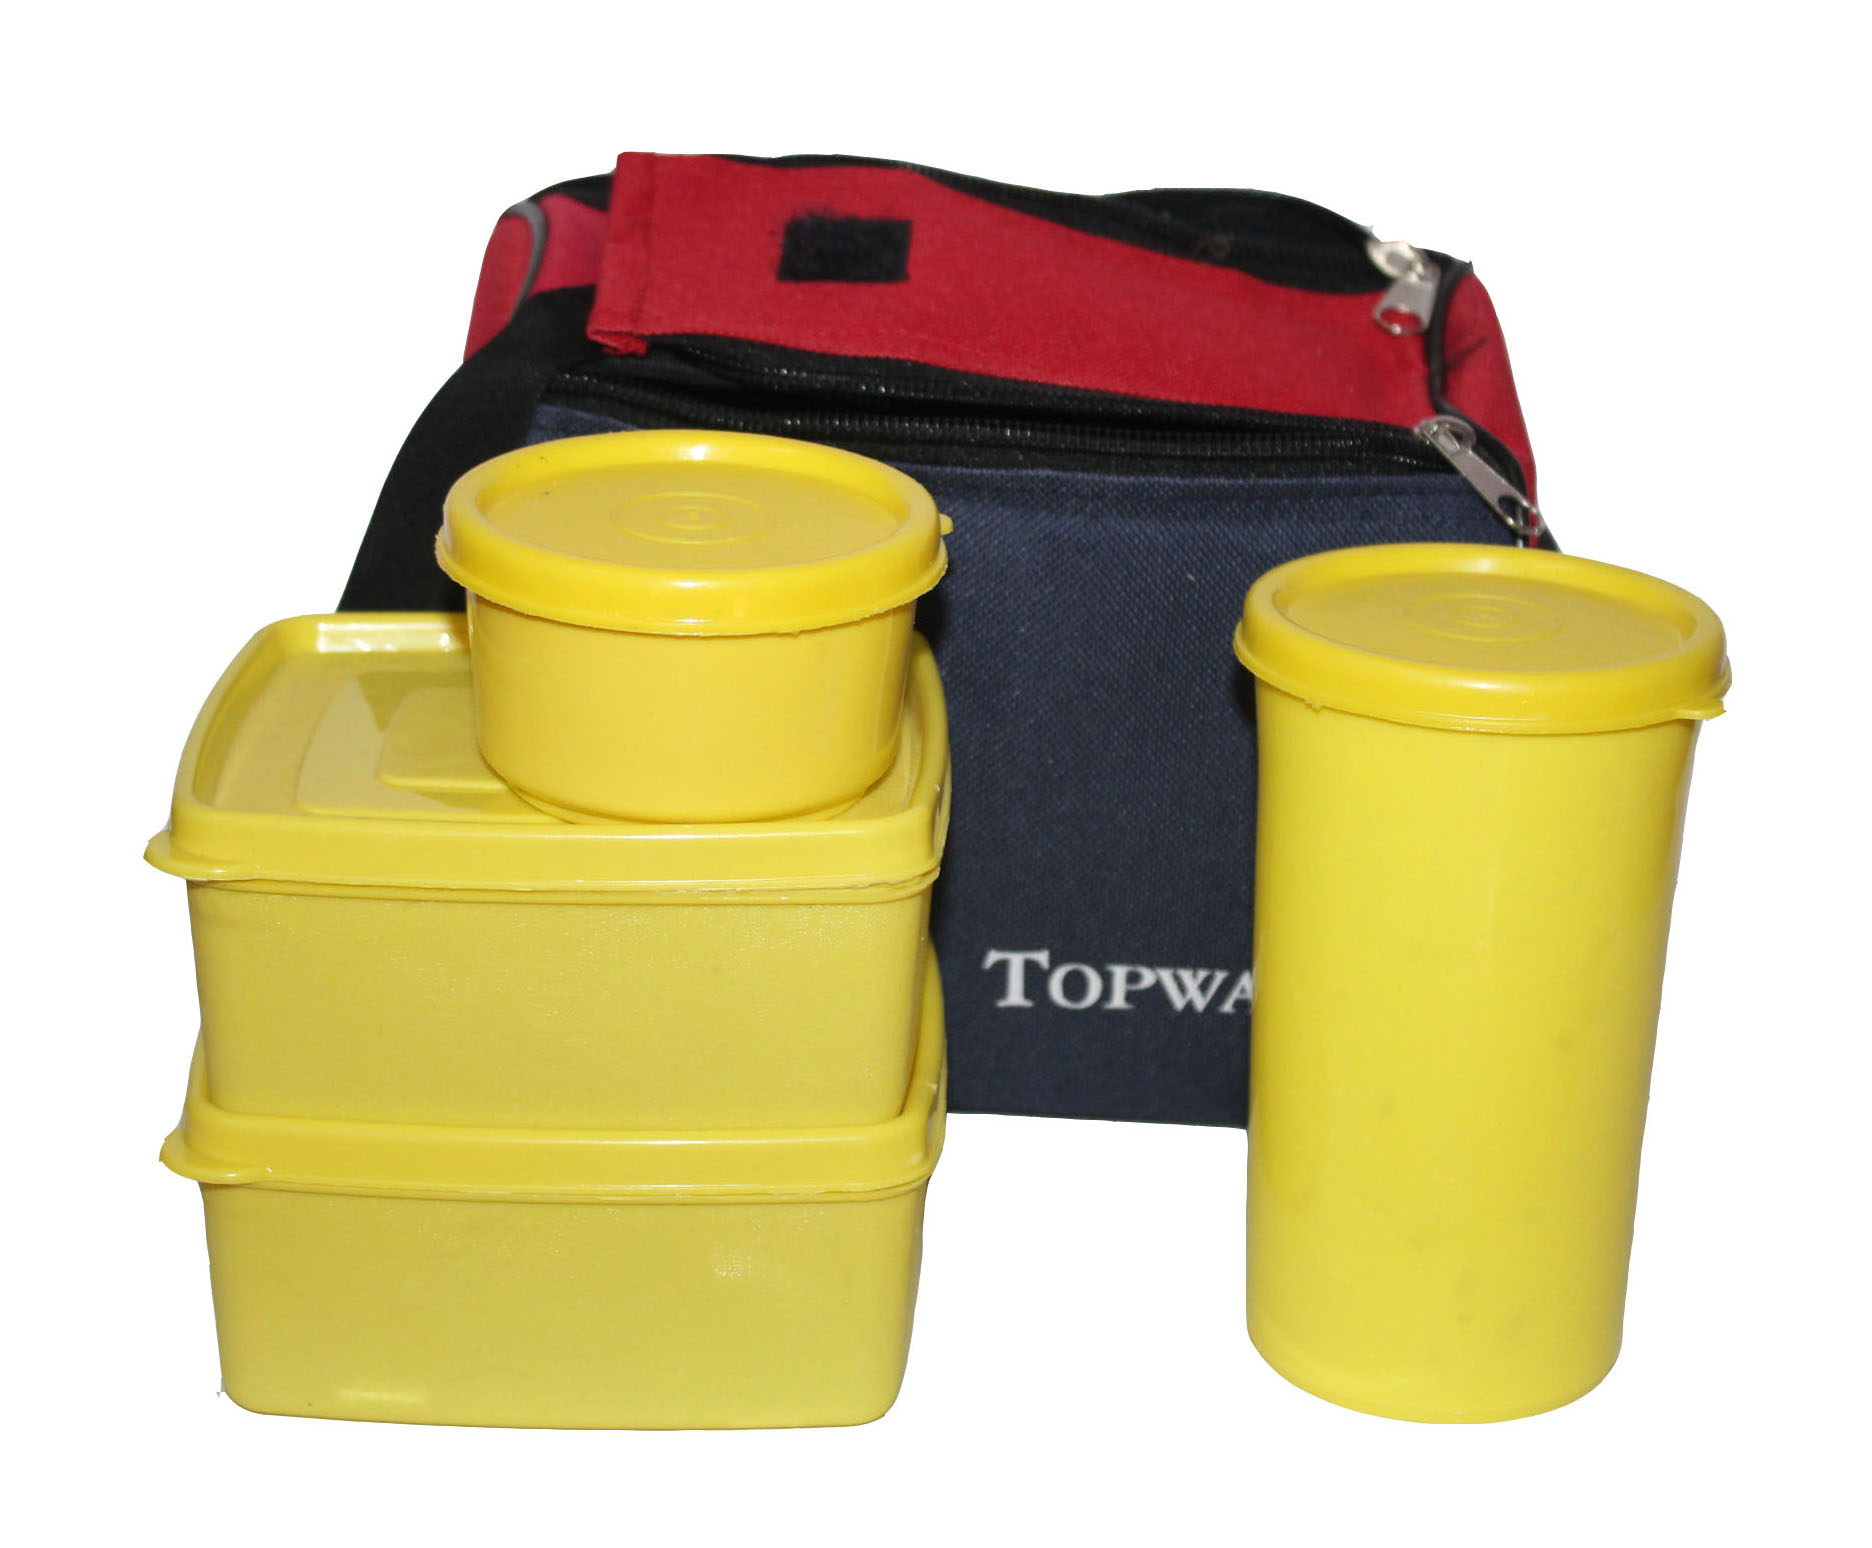 buy-topware-lunh-box-online-249-from-shopclues